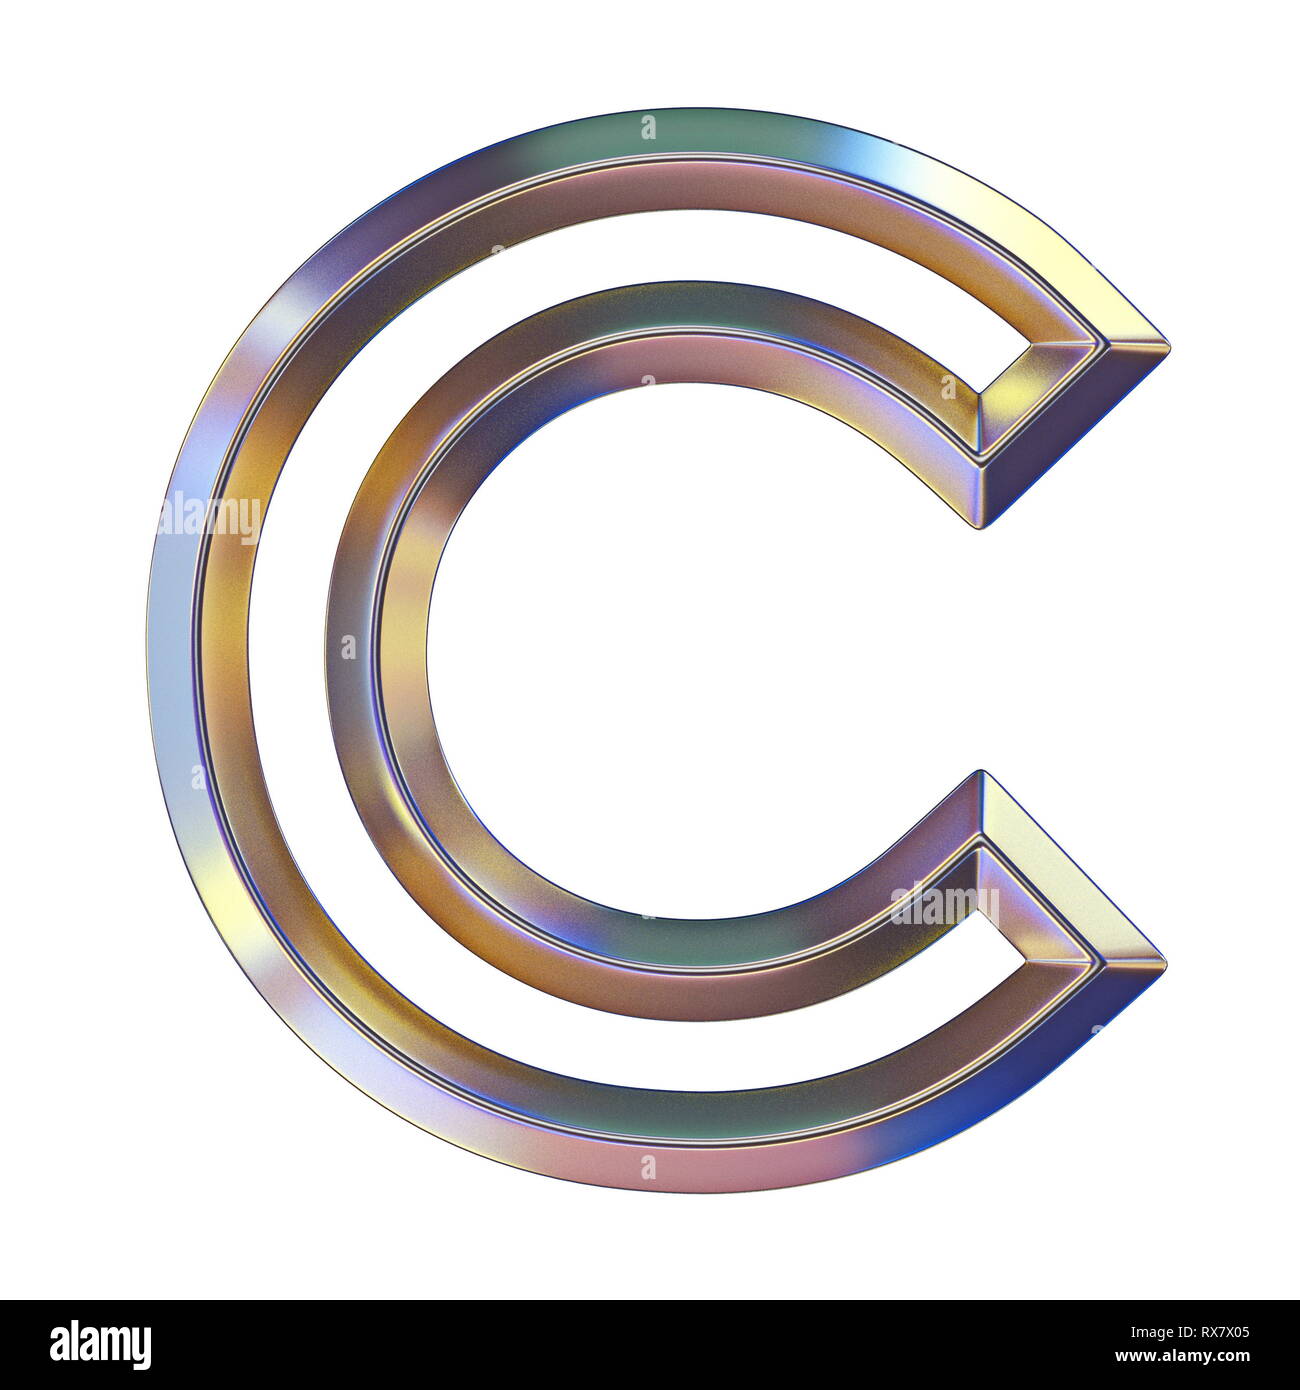 Chrome font with colorful reflections Letter C 3D render illustration isolated on white background Stock Photo